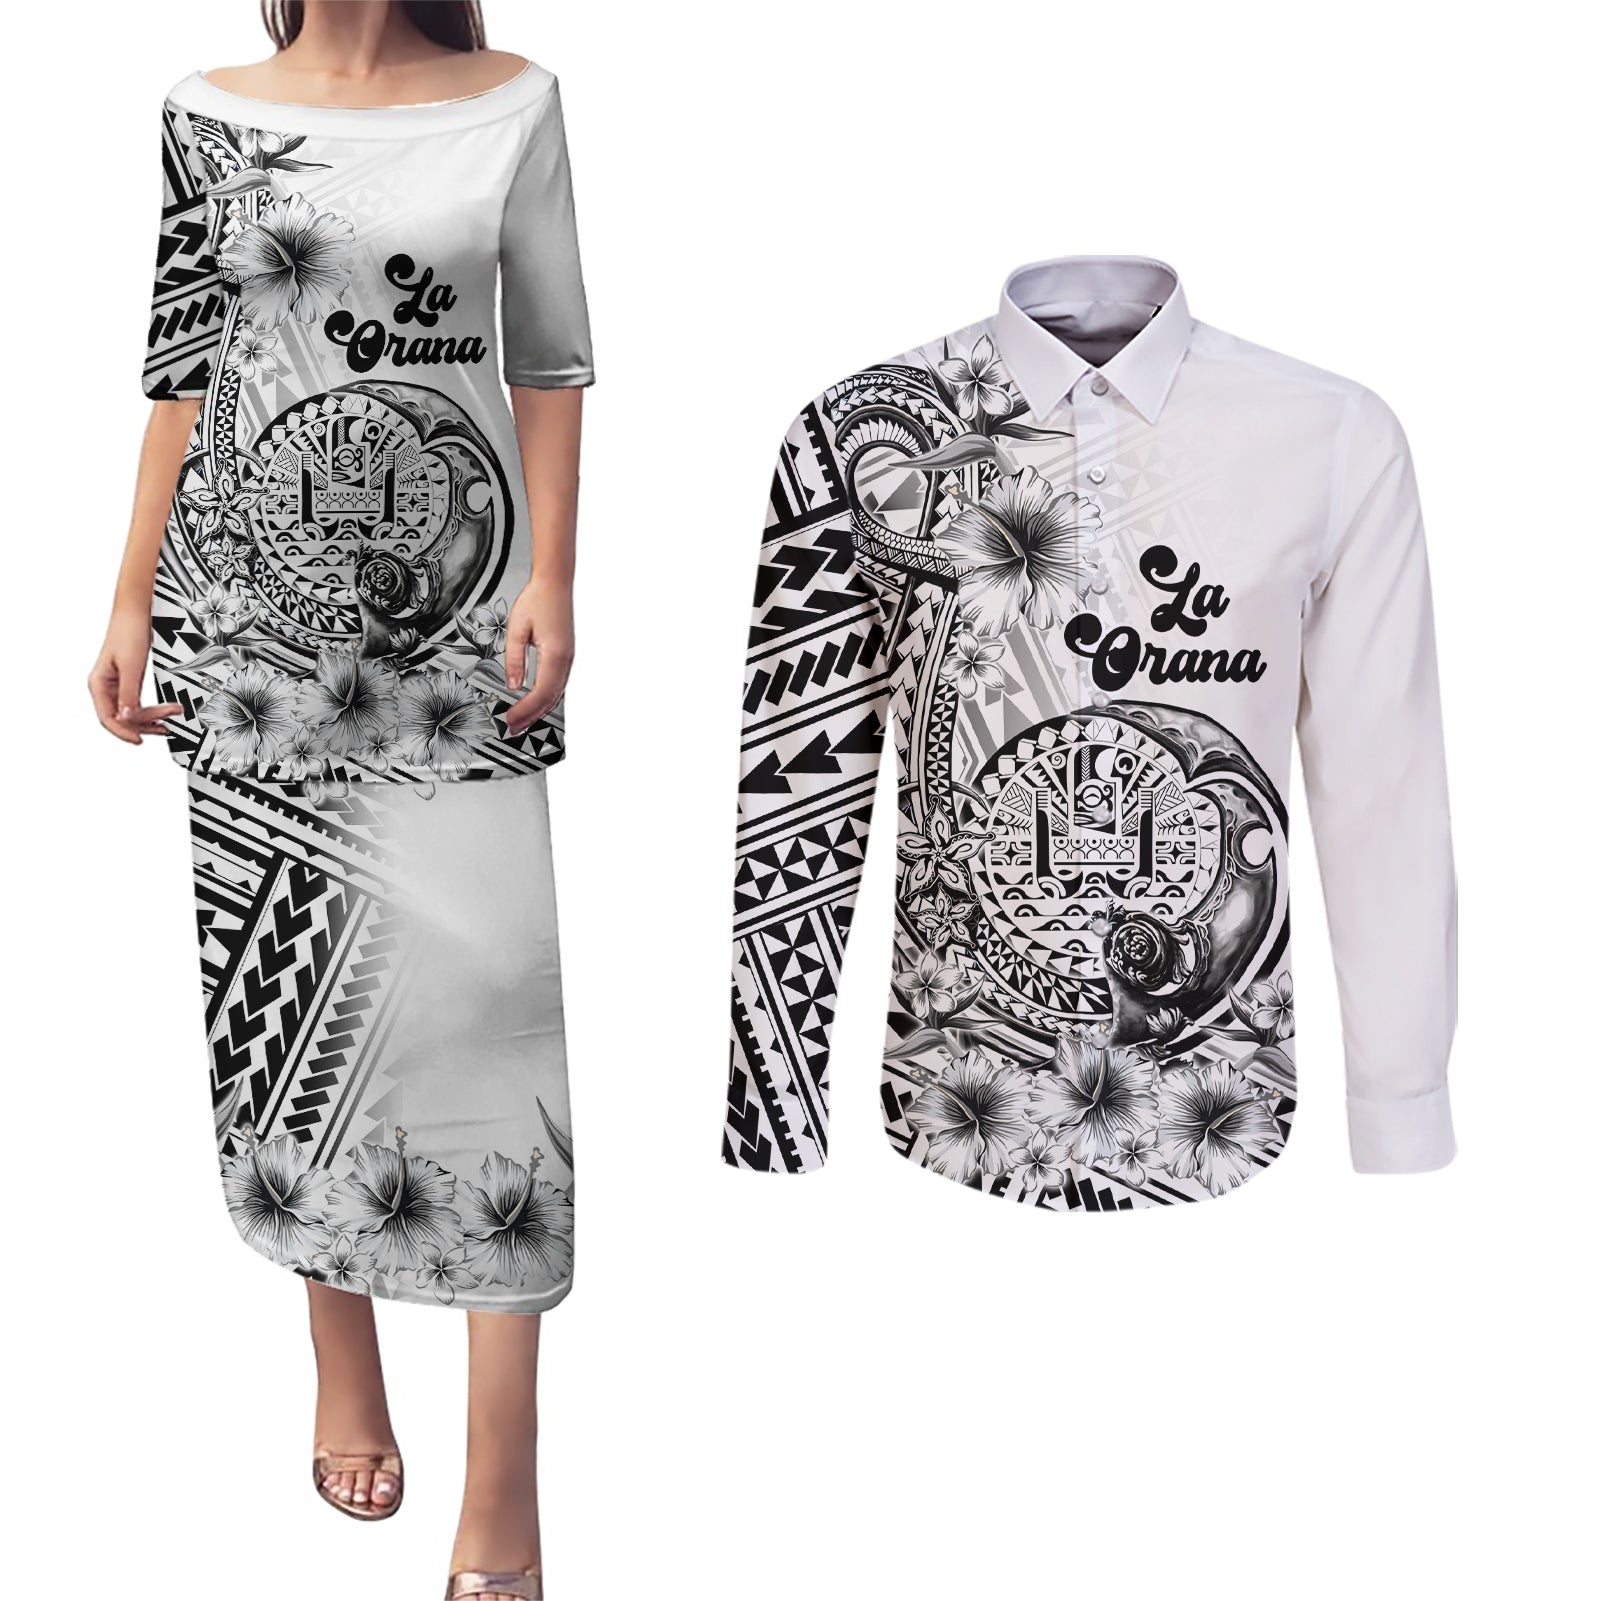 La Orana Tahiti Personalised Couples Matching Puletasi Dress and Long Sleeve Button Shirt French Polynesia Hook Tattoo Special White Color LT9 White - Polynesian Pride